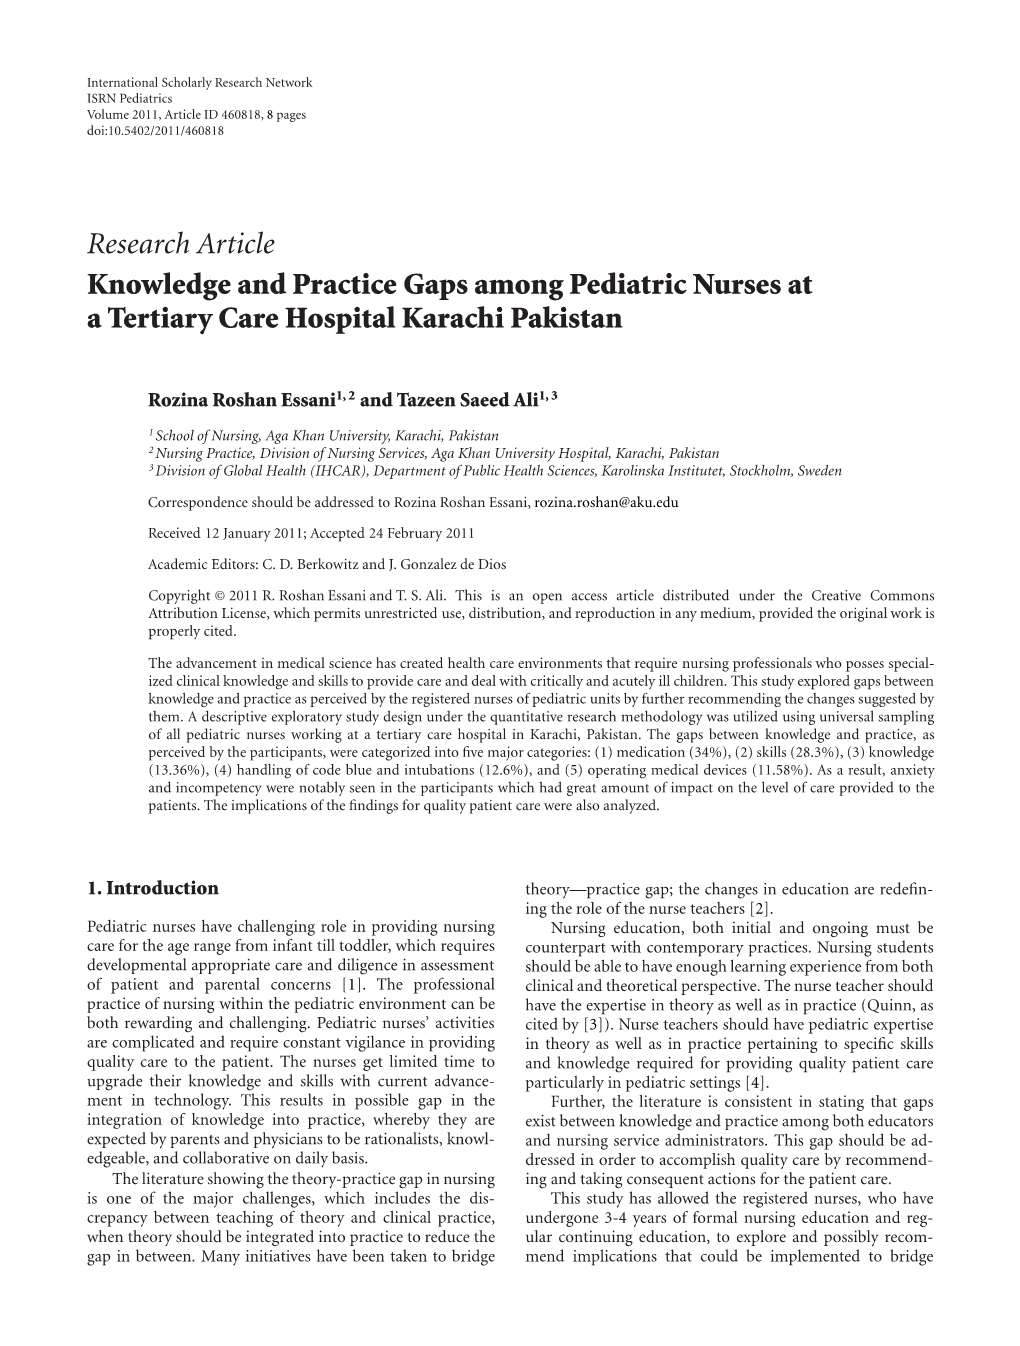 Research Article Knowledge and Practice Gaps Among Pediatric Nurses at a Tertiary Care Hospital Karachi Pakistan